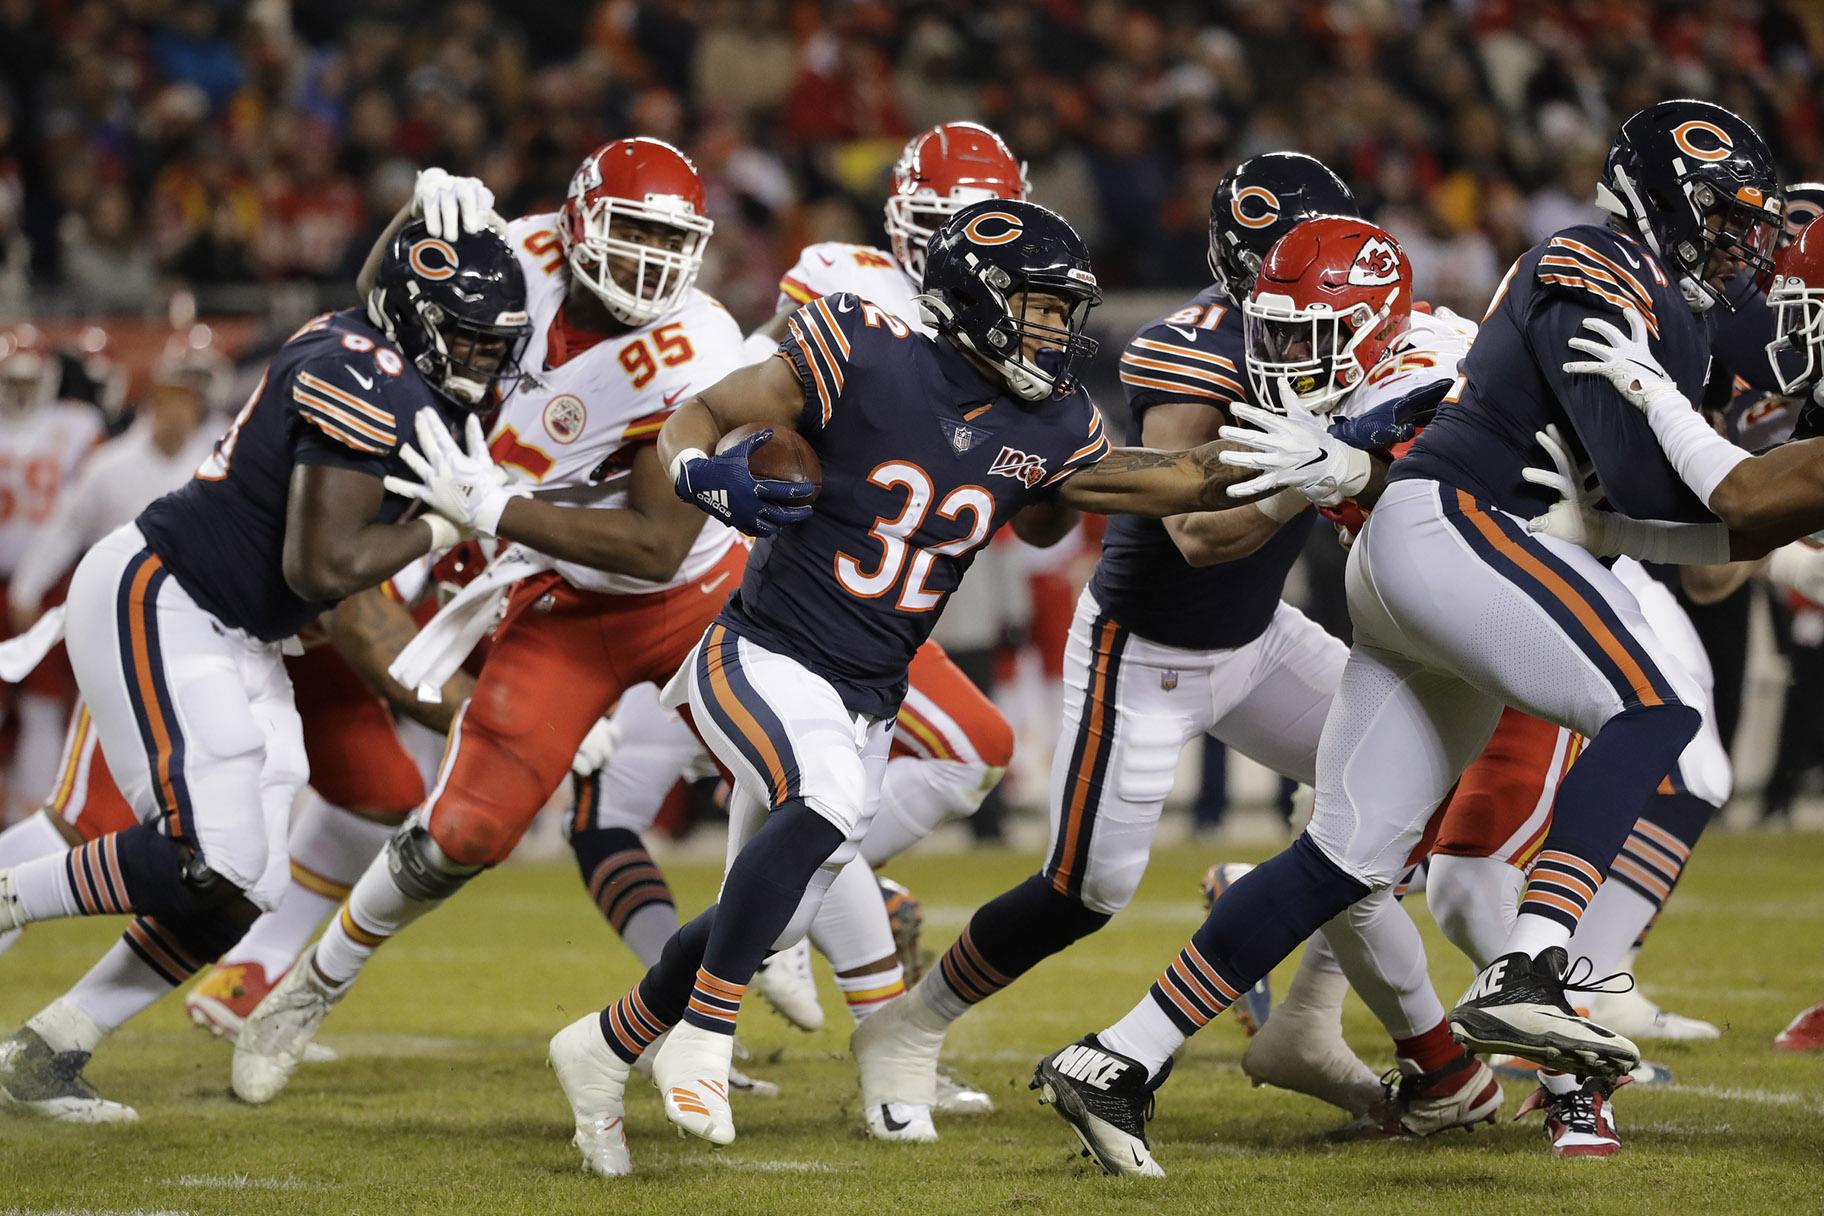 Chicago Bears running back David Montgomery (32) runs against the Kansas City Chiefs in the first half of an NFL football game in Chicago, Sunday, Dec. 22, 2019. (AP Photo  /Nam Y. Huh)